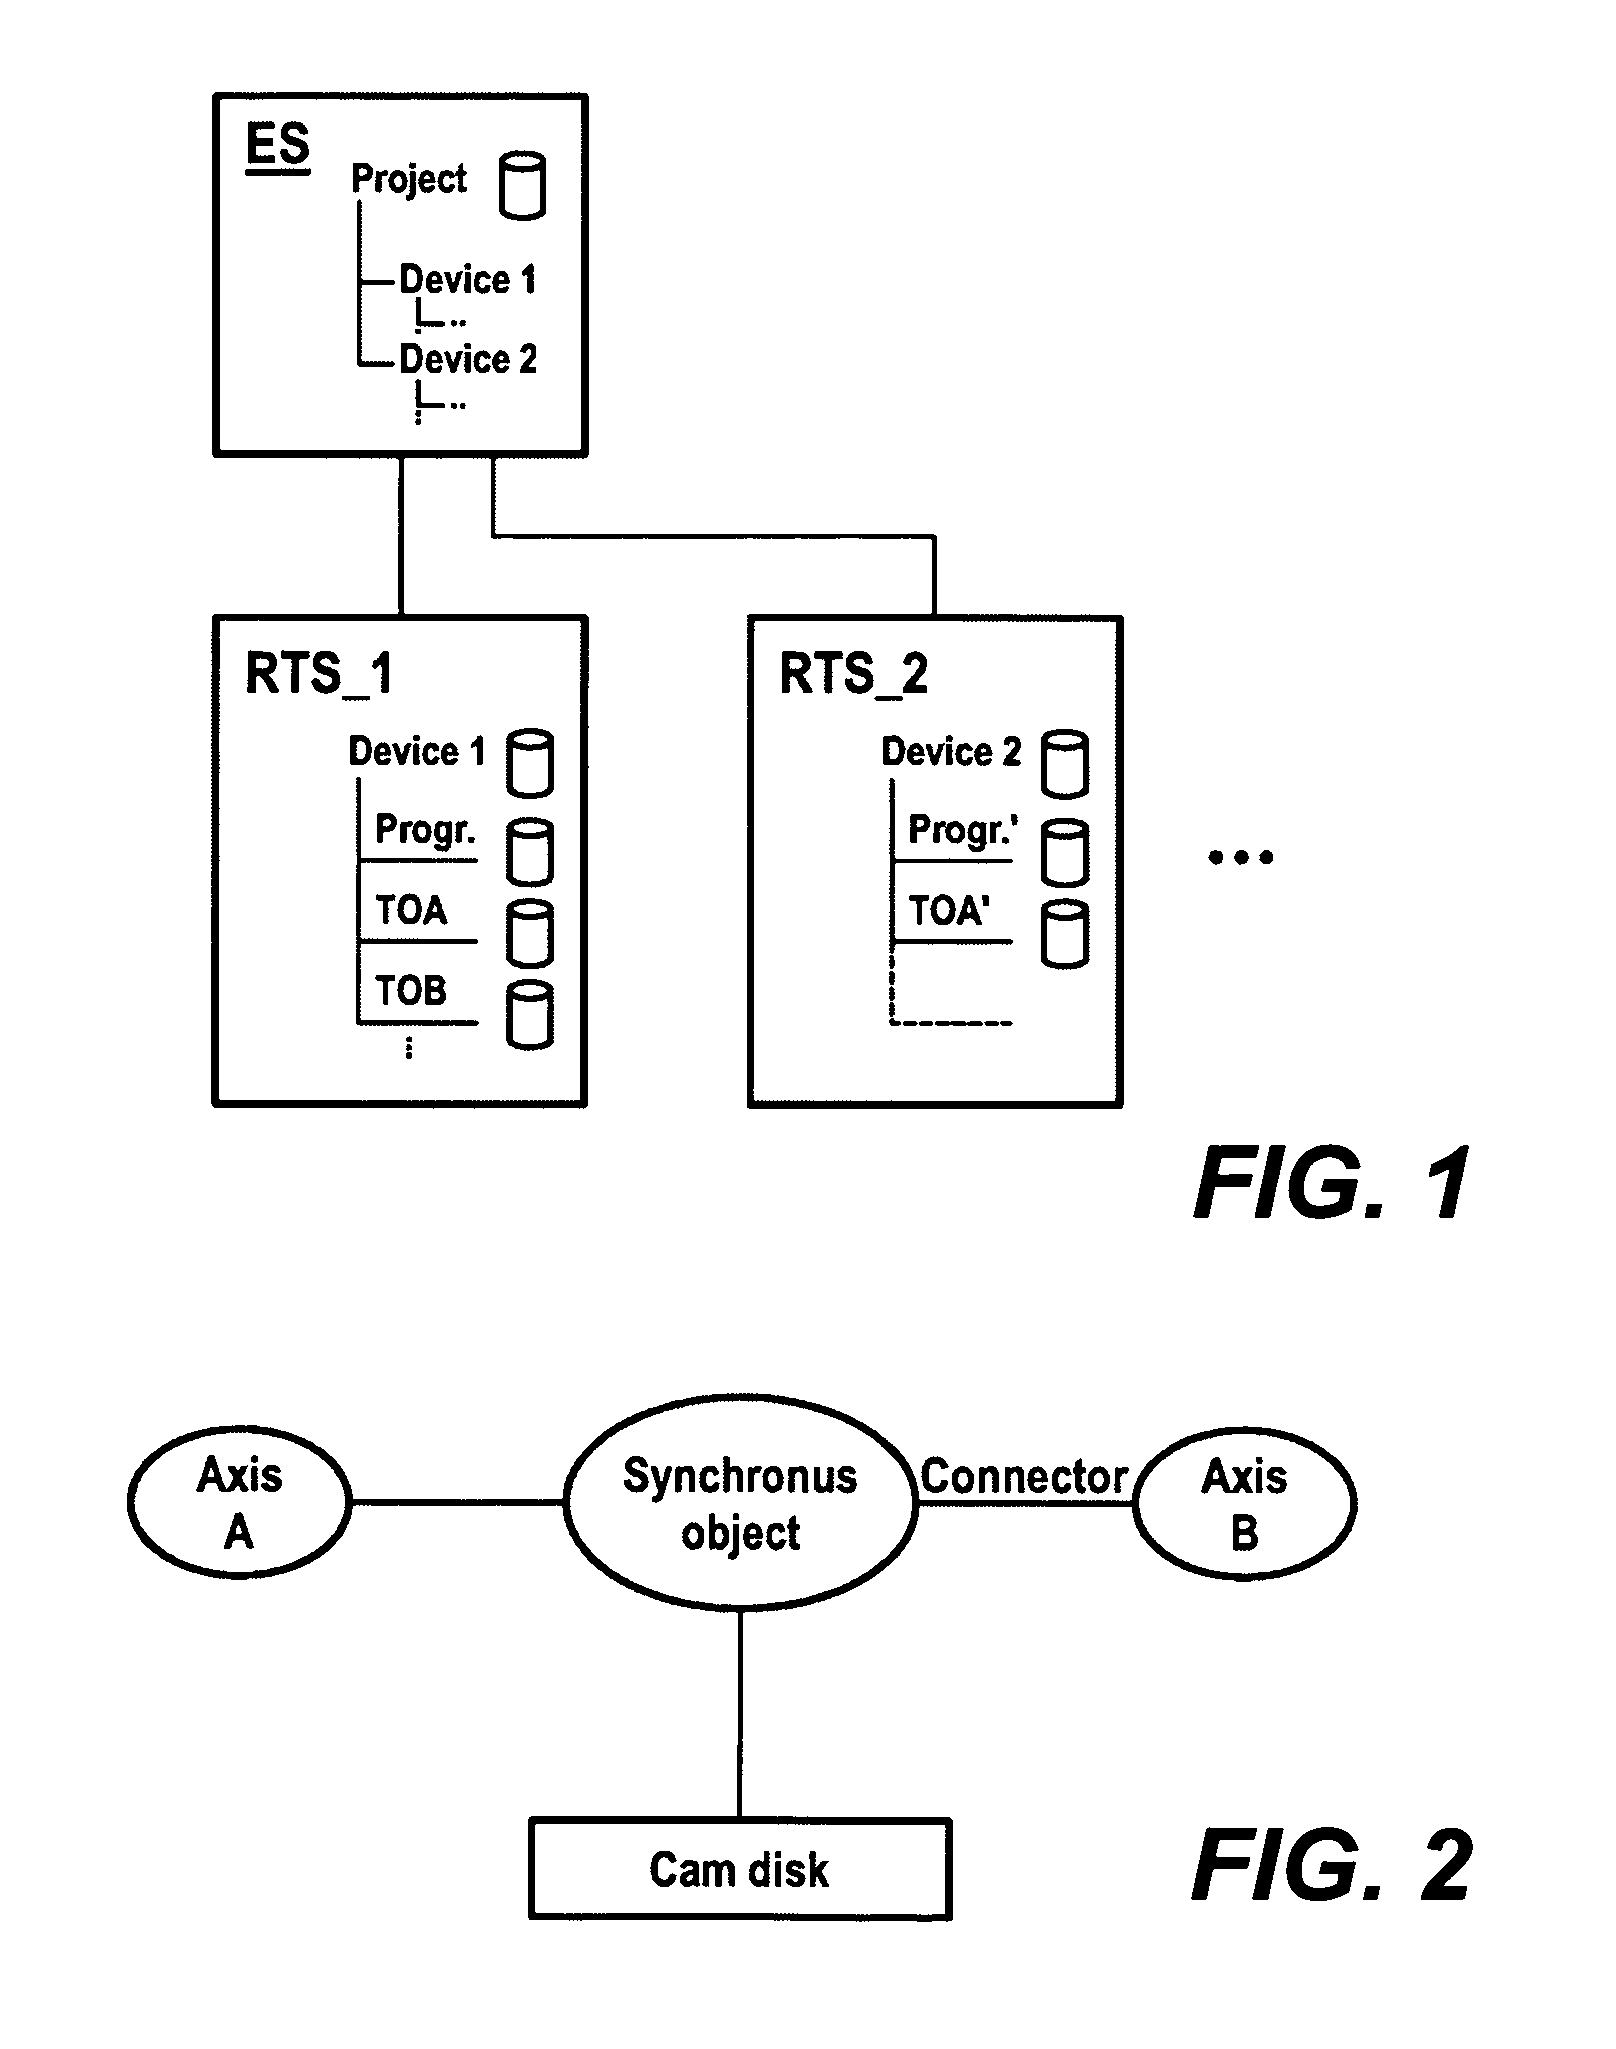 Apparatus and method for commissioning and diagnosing control systems